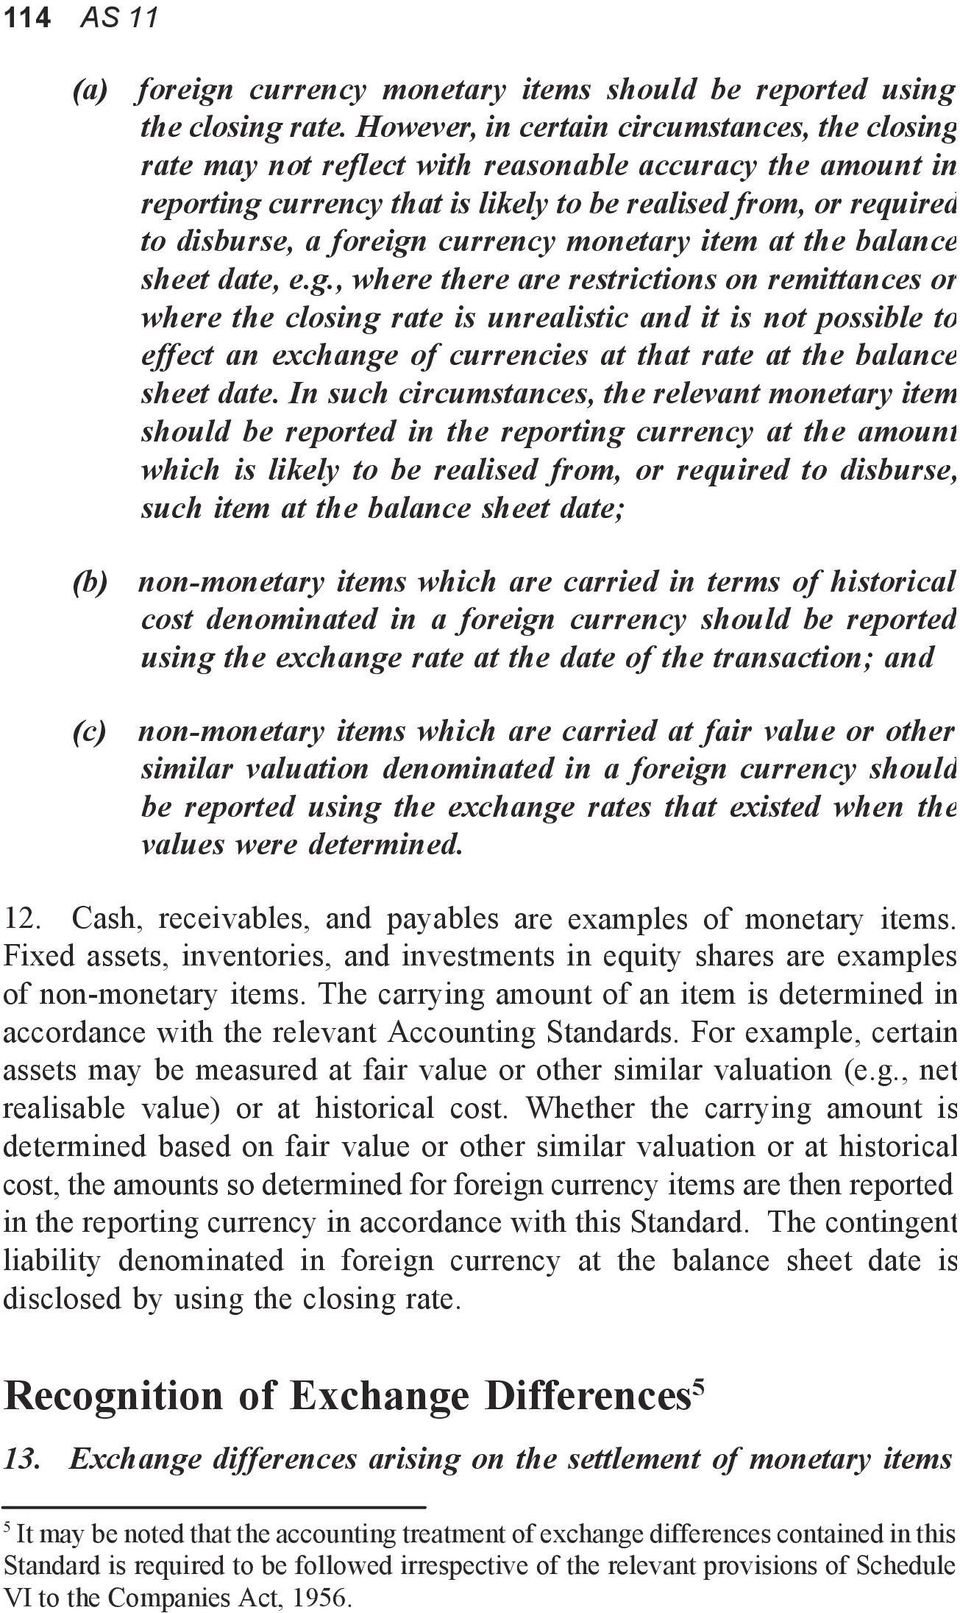 currency monetary item at the balance sheet date, e.g.